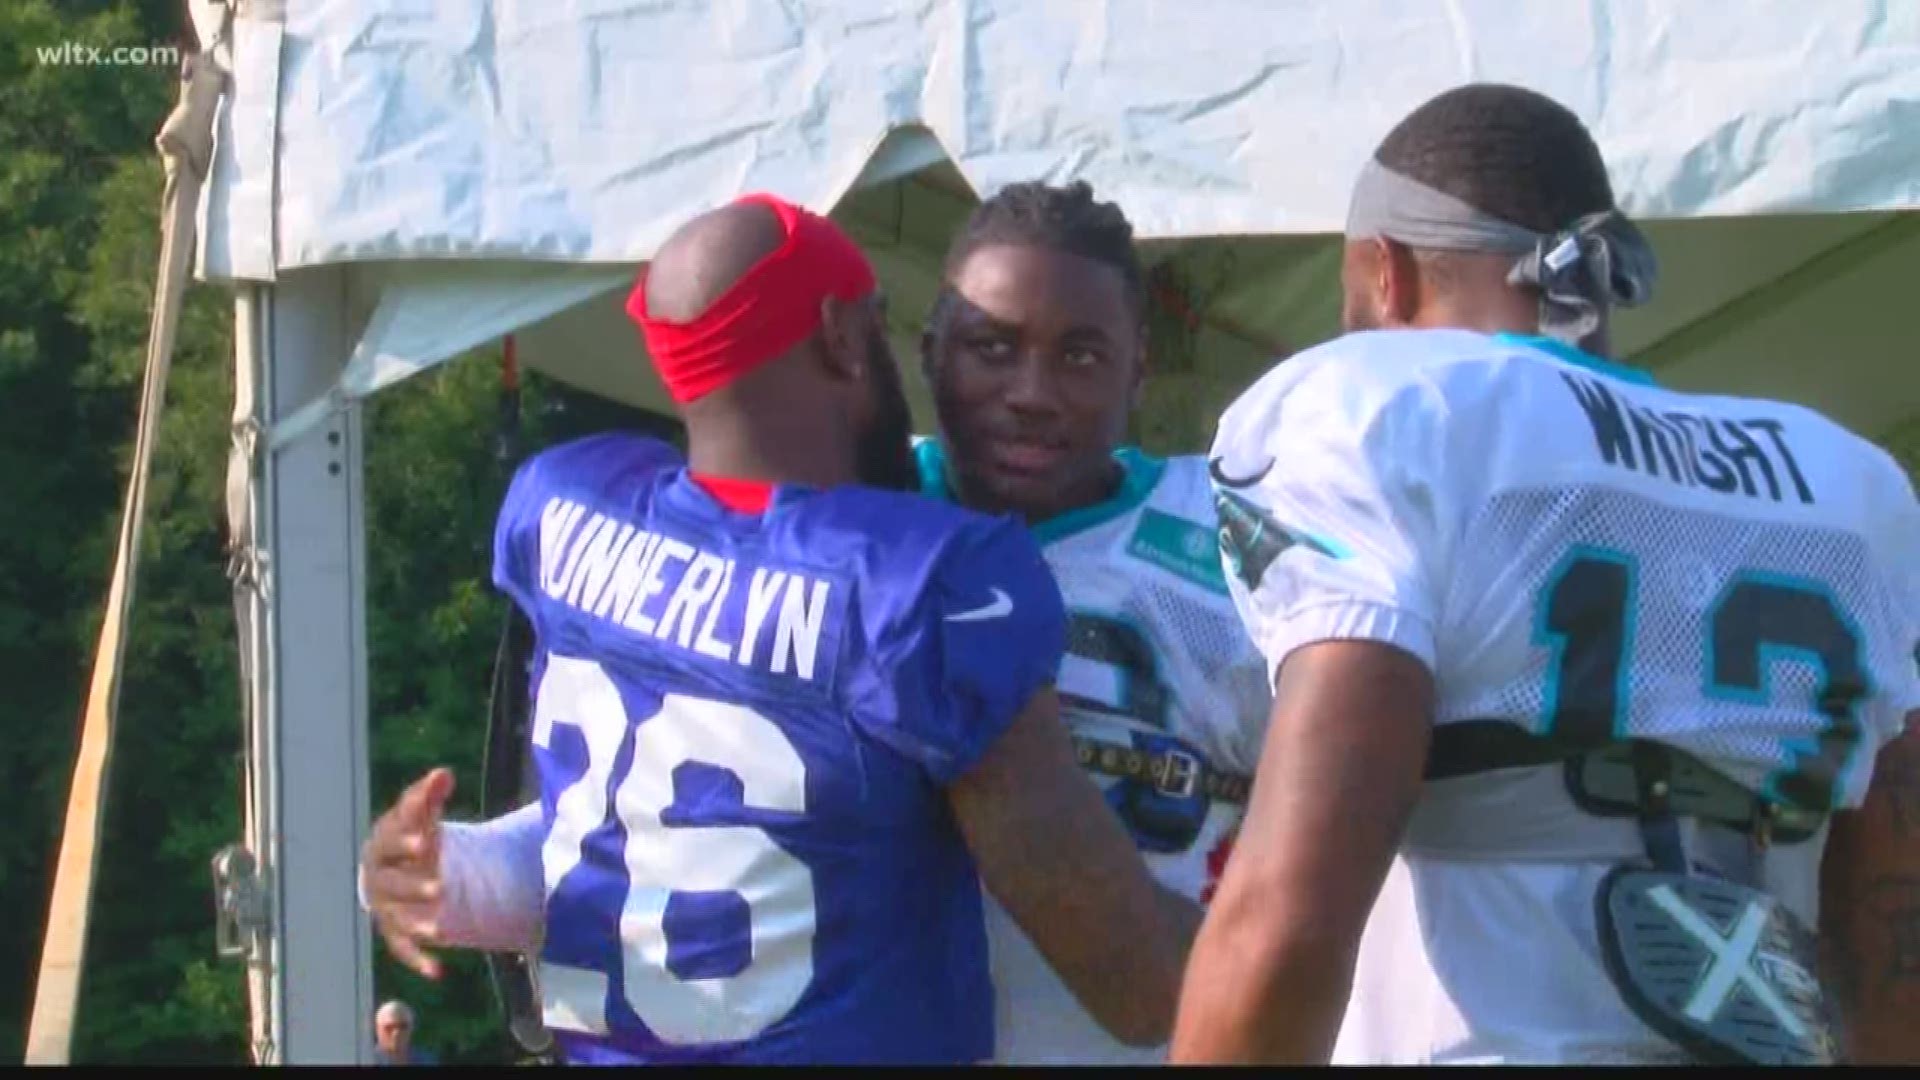 He signed with a different team after being released from Carolina in February but former Gamecock Captain Munnerlyn returned to Spartanburg with smiles and hugs from teammates. His old college teammate, Patrick Dimarco, is also a Buffalo Bill and he felt right at home for joint practice with the Panthers as well.